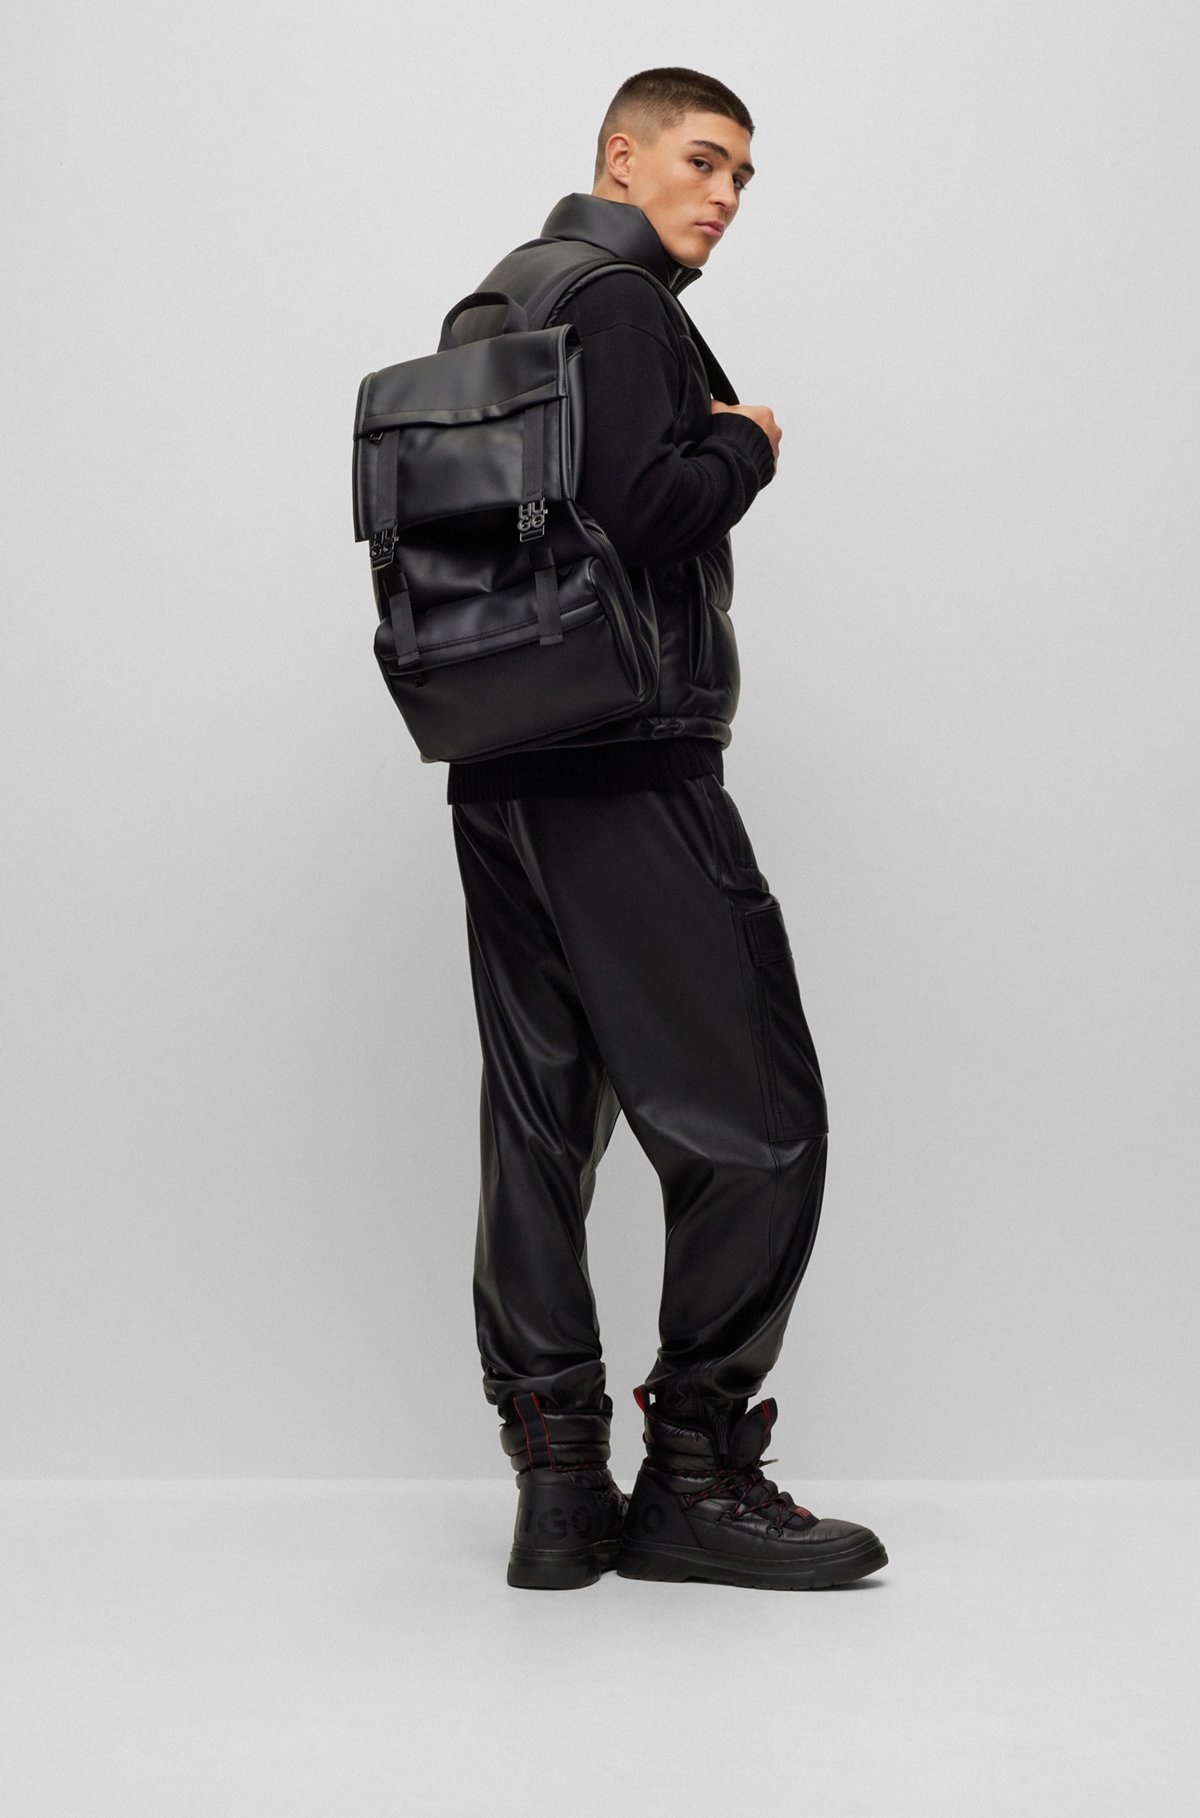 Flap-closure backpack with stacked-logo buckles, Black